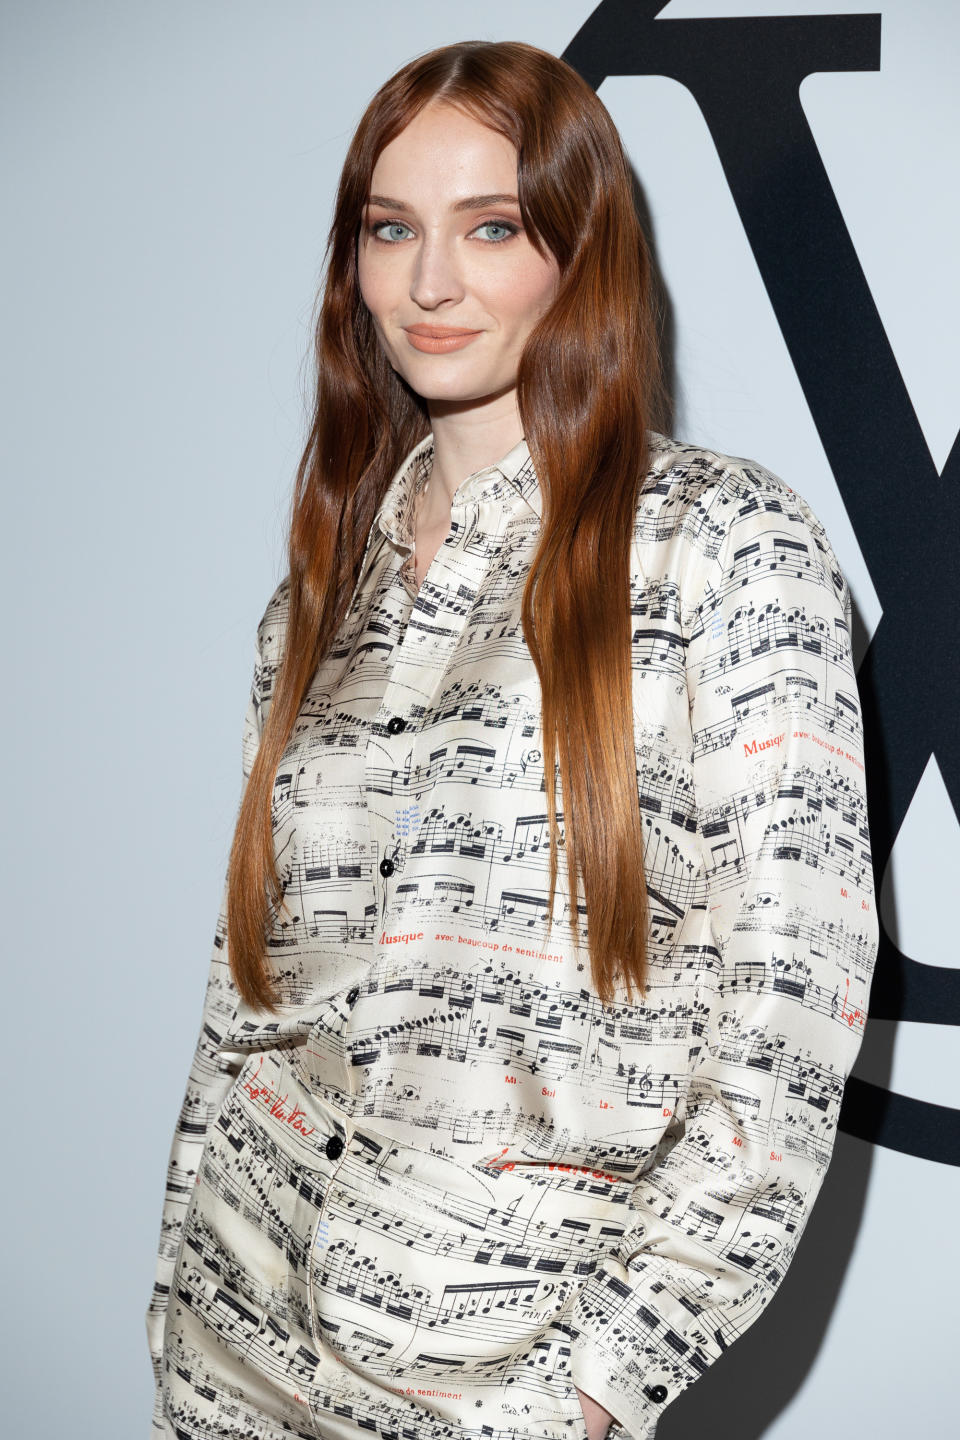 Sophie Turner posing in a unique music-sheet patterned outfit